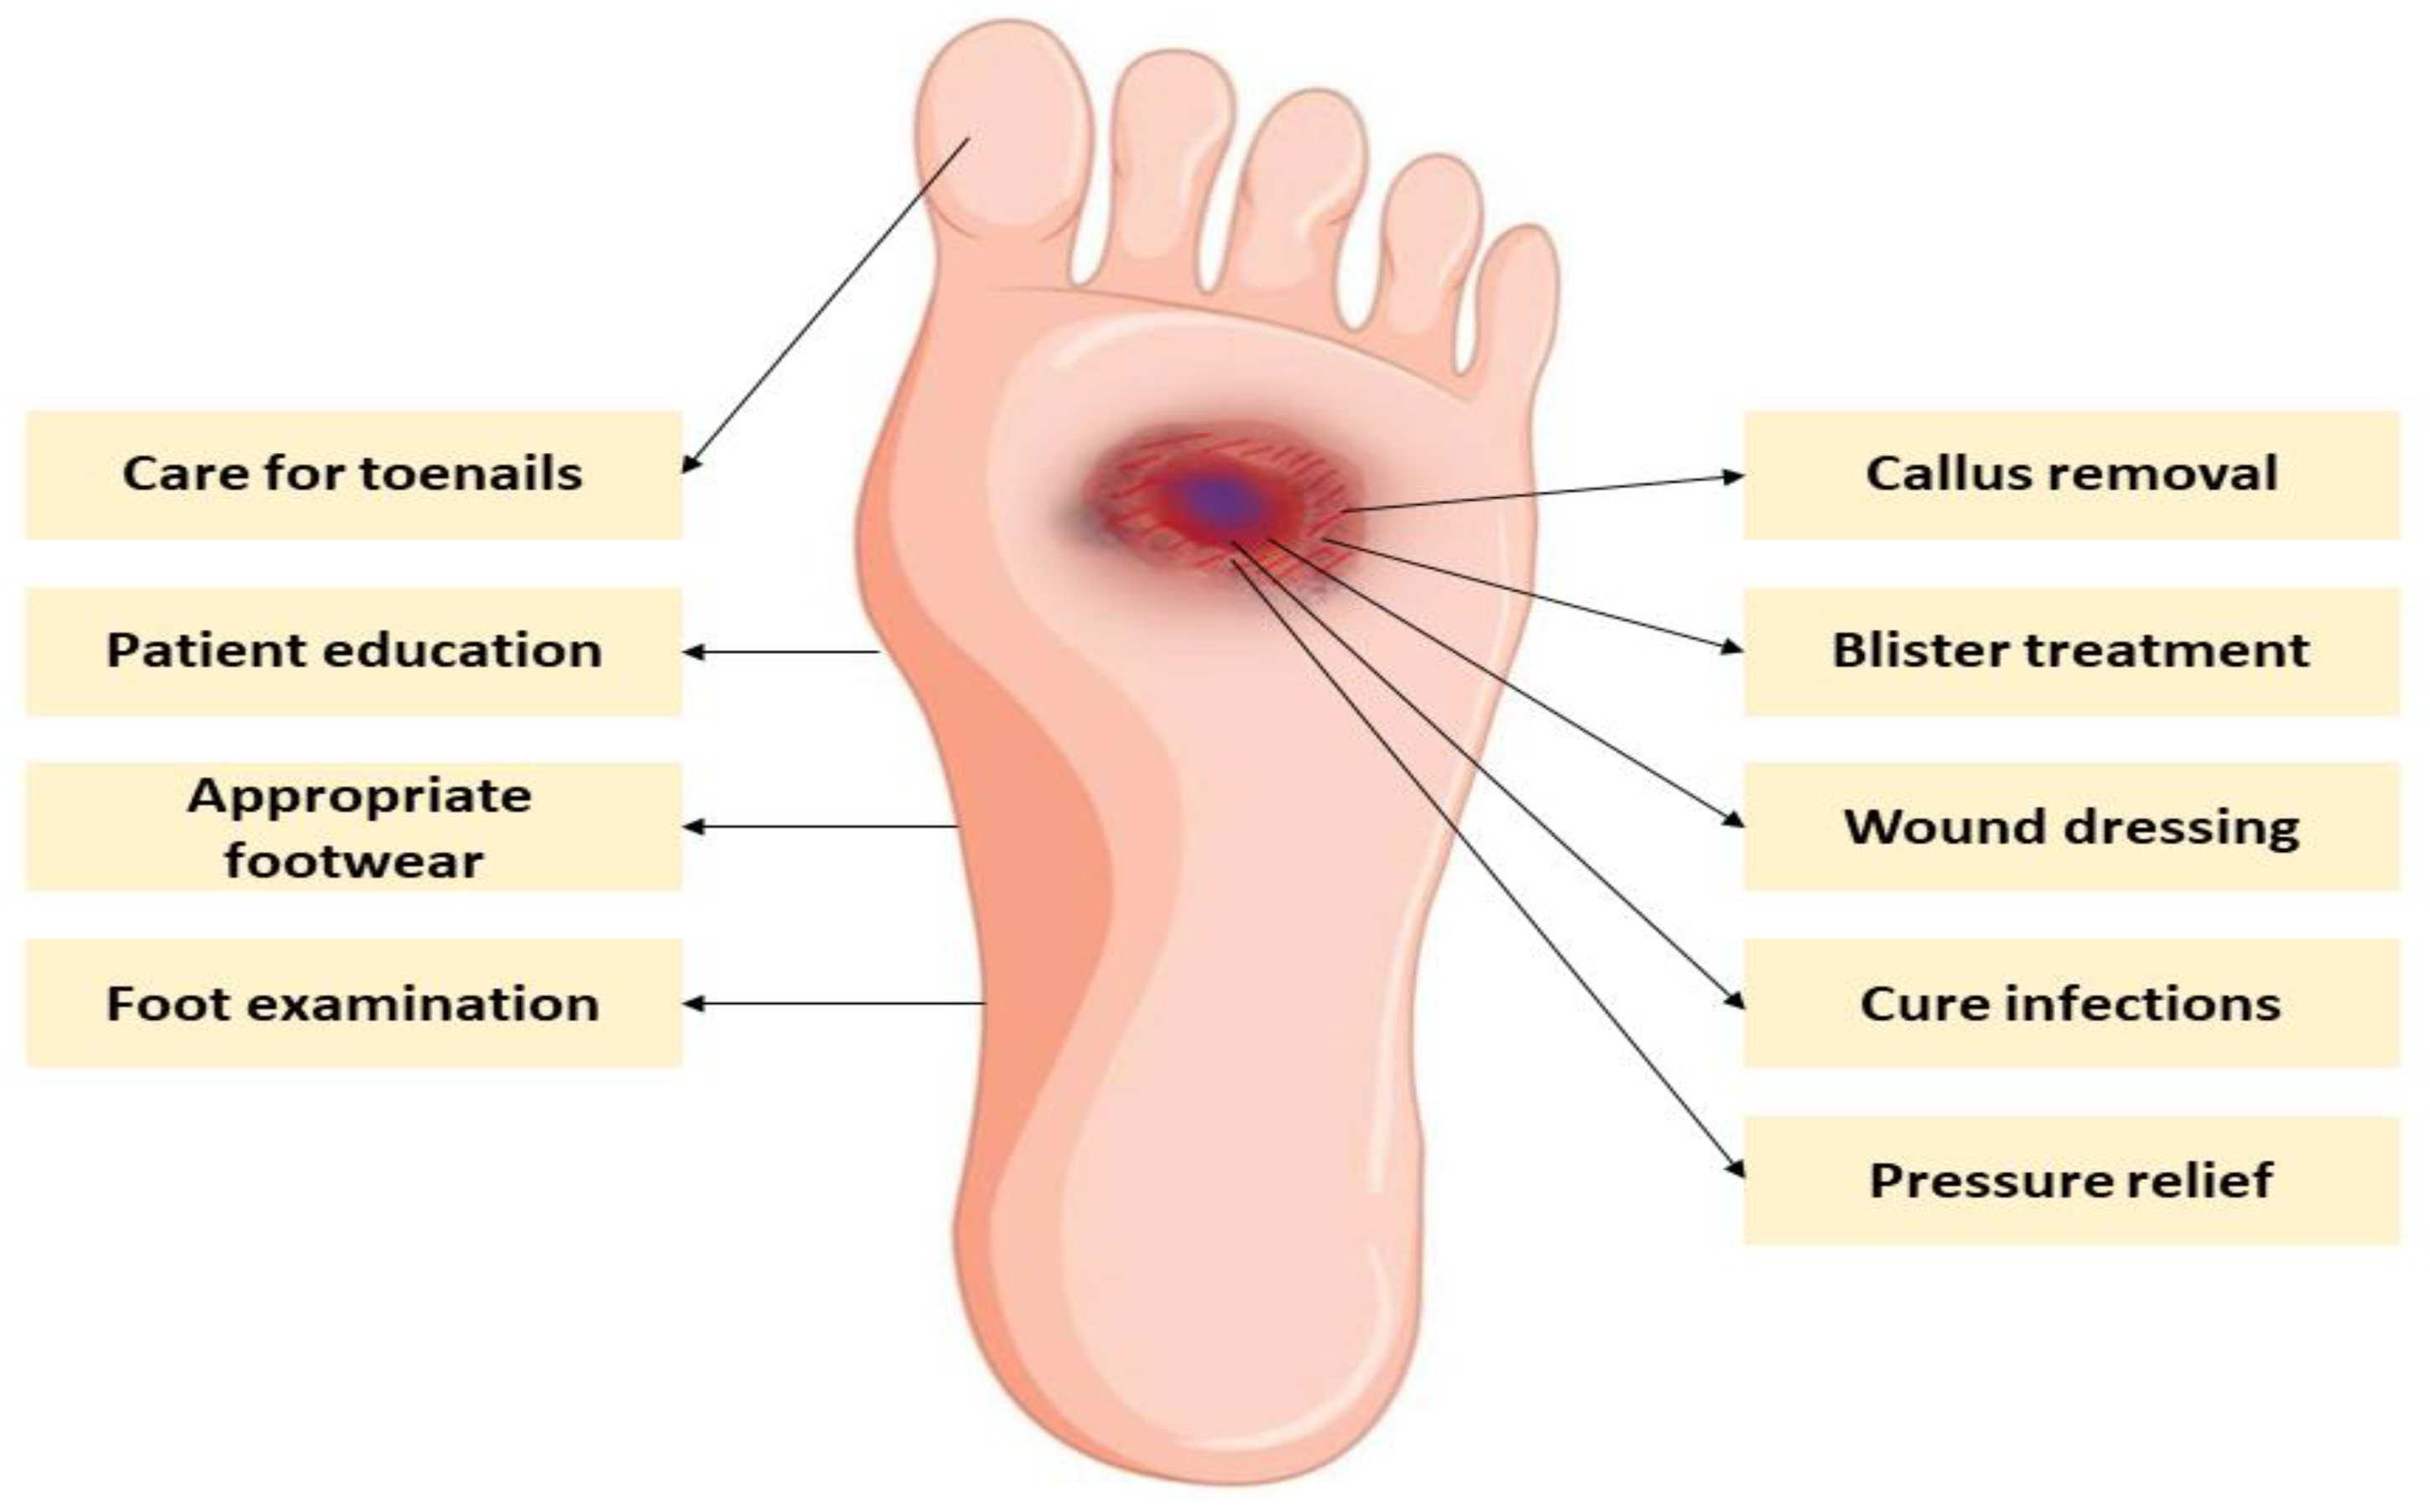 Prevention and Proper Care of Diabetic Foot Ulcers | Healogics